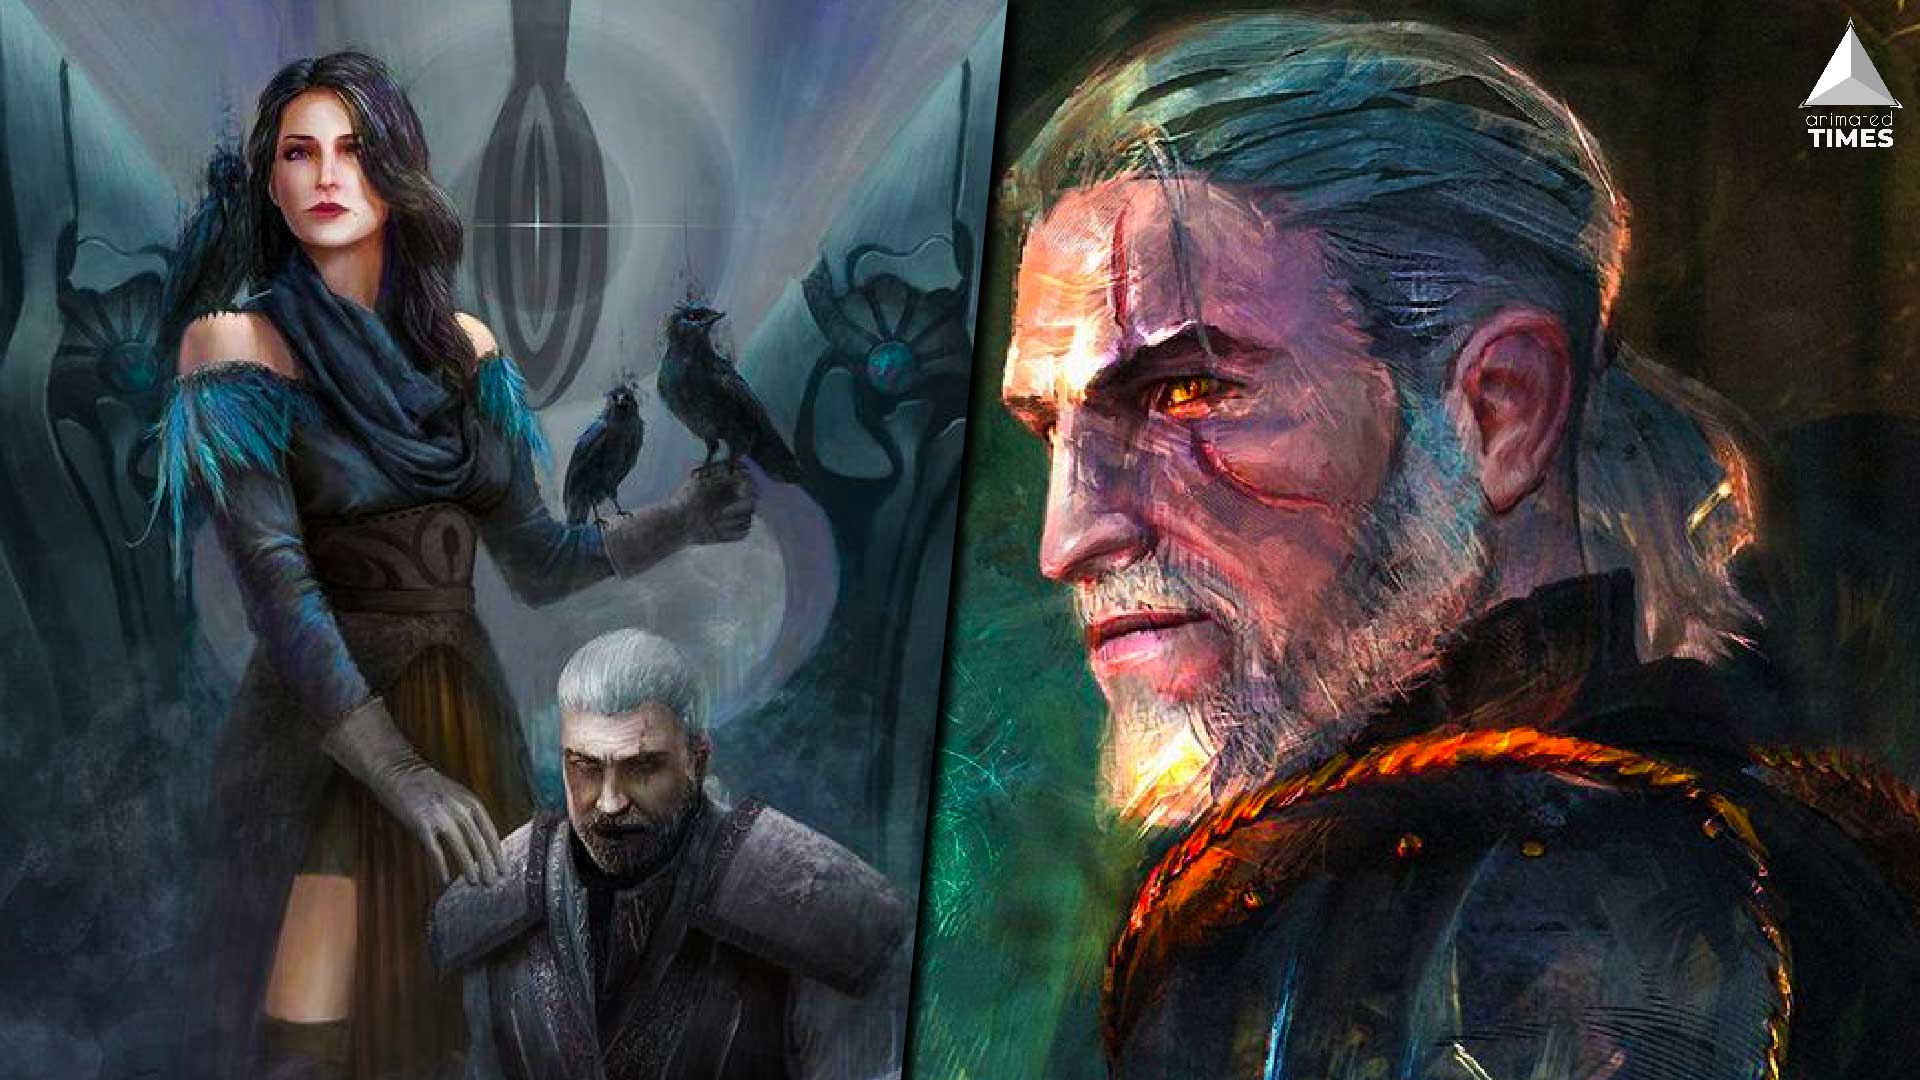 10 Most Amazing Fan Arts To Toss To Your Witcher!